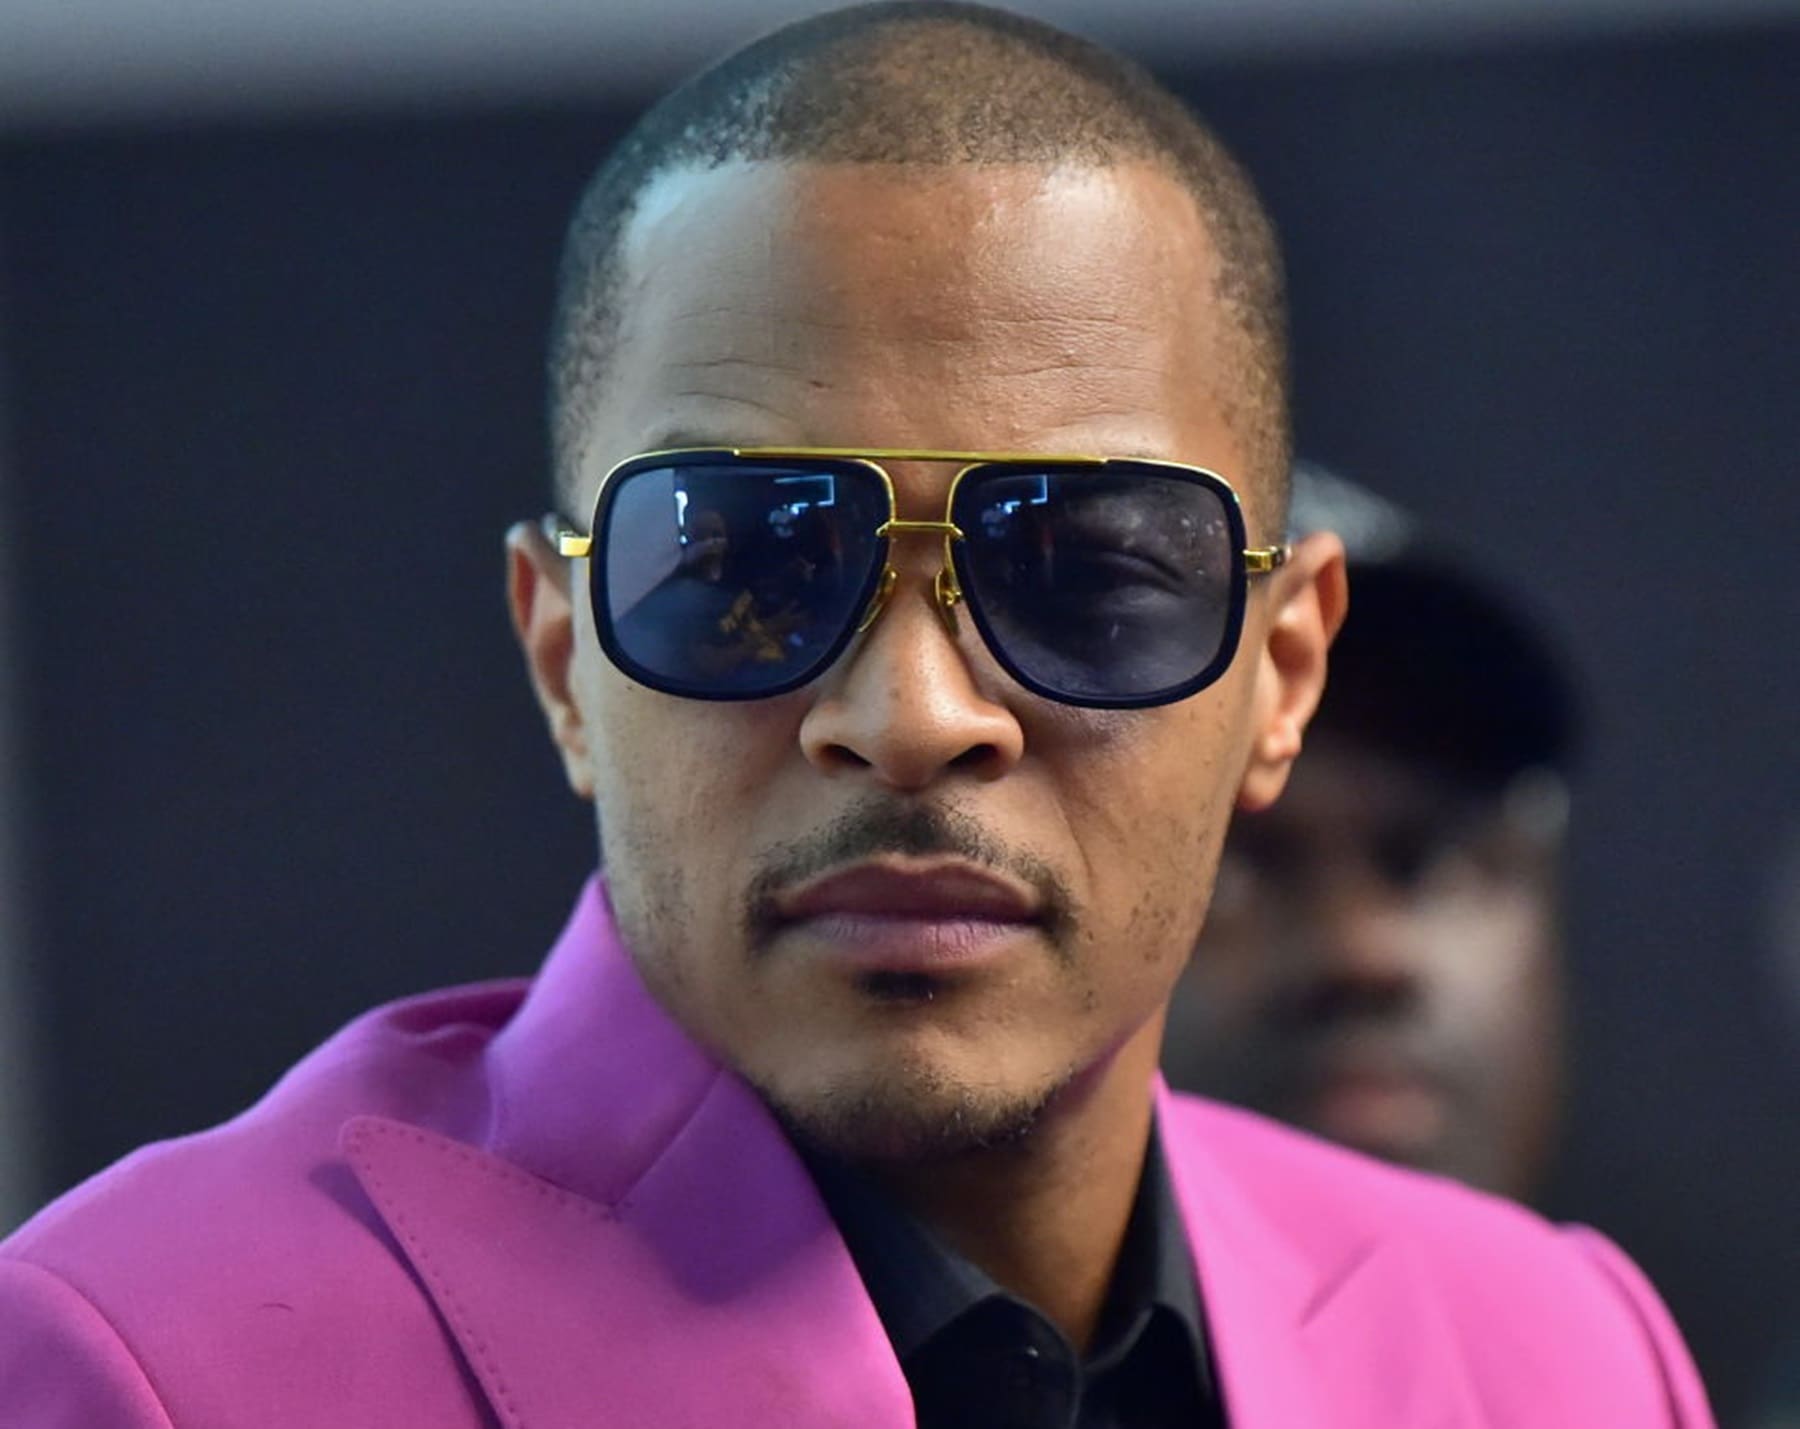 T.I. Shares A Throwback Photo Since He Was A Kid And Fans Are Laughing Their Hearts Out - See The Photo